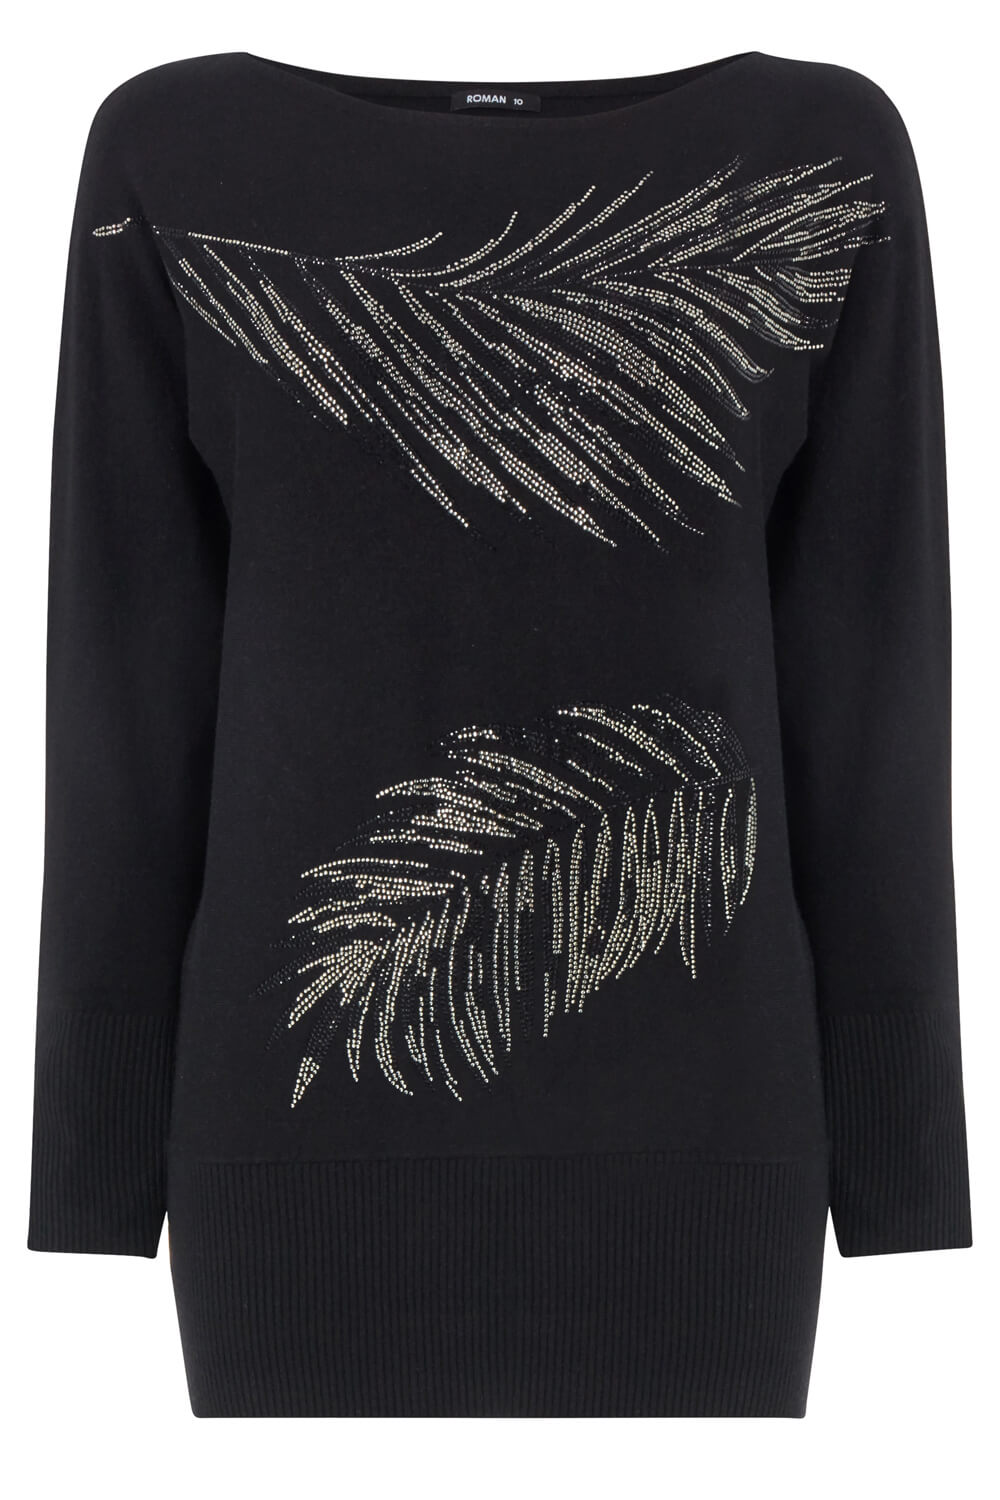 Black Feather Batwing Jumper , Image 4 of 4